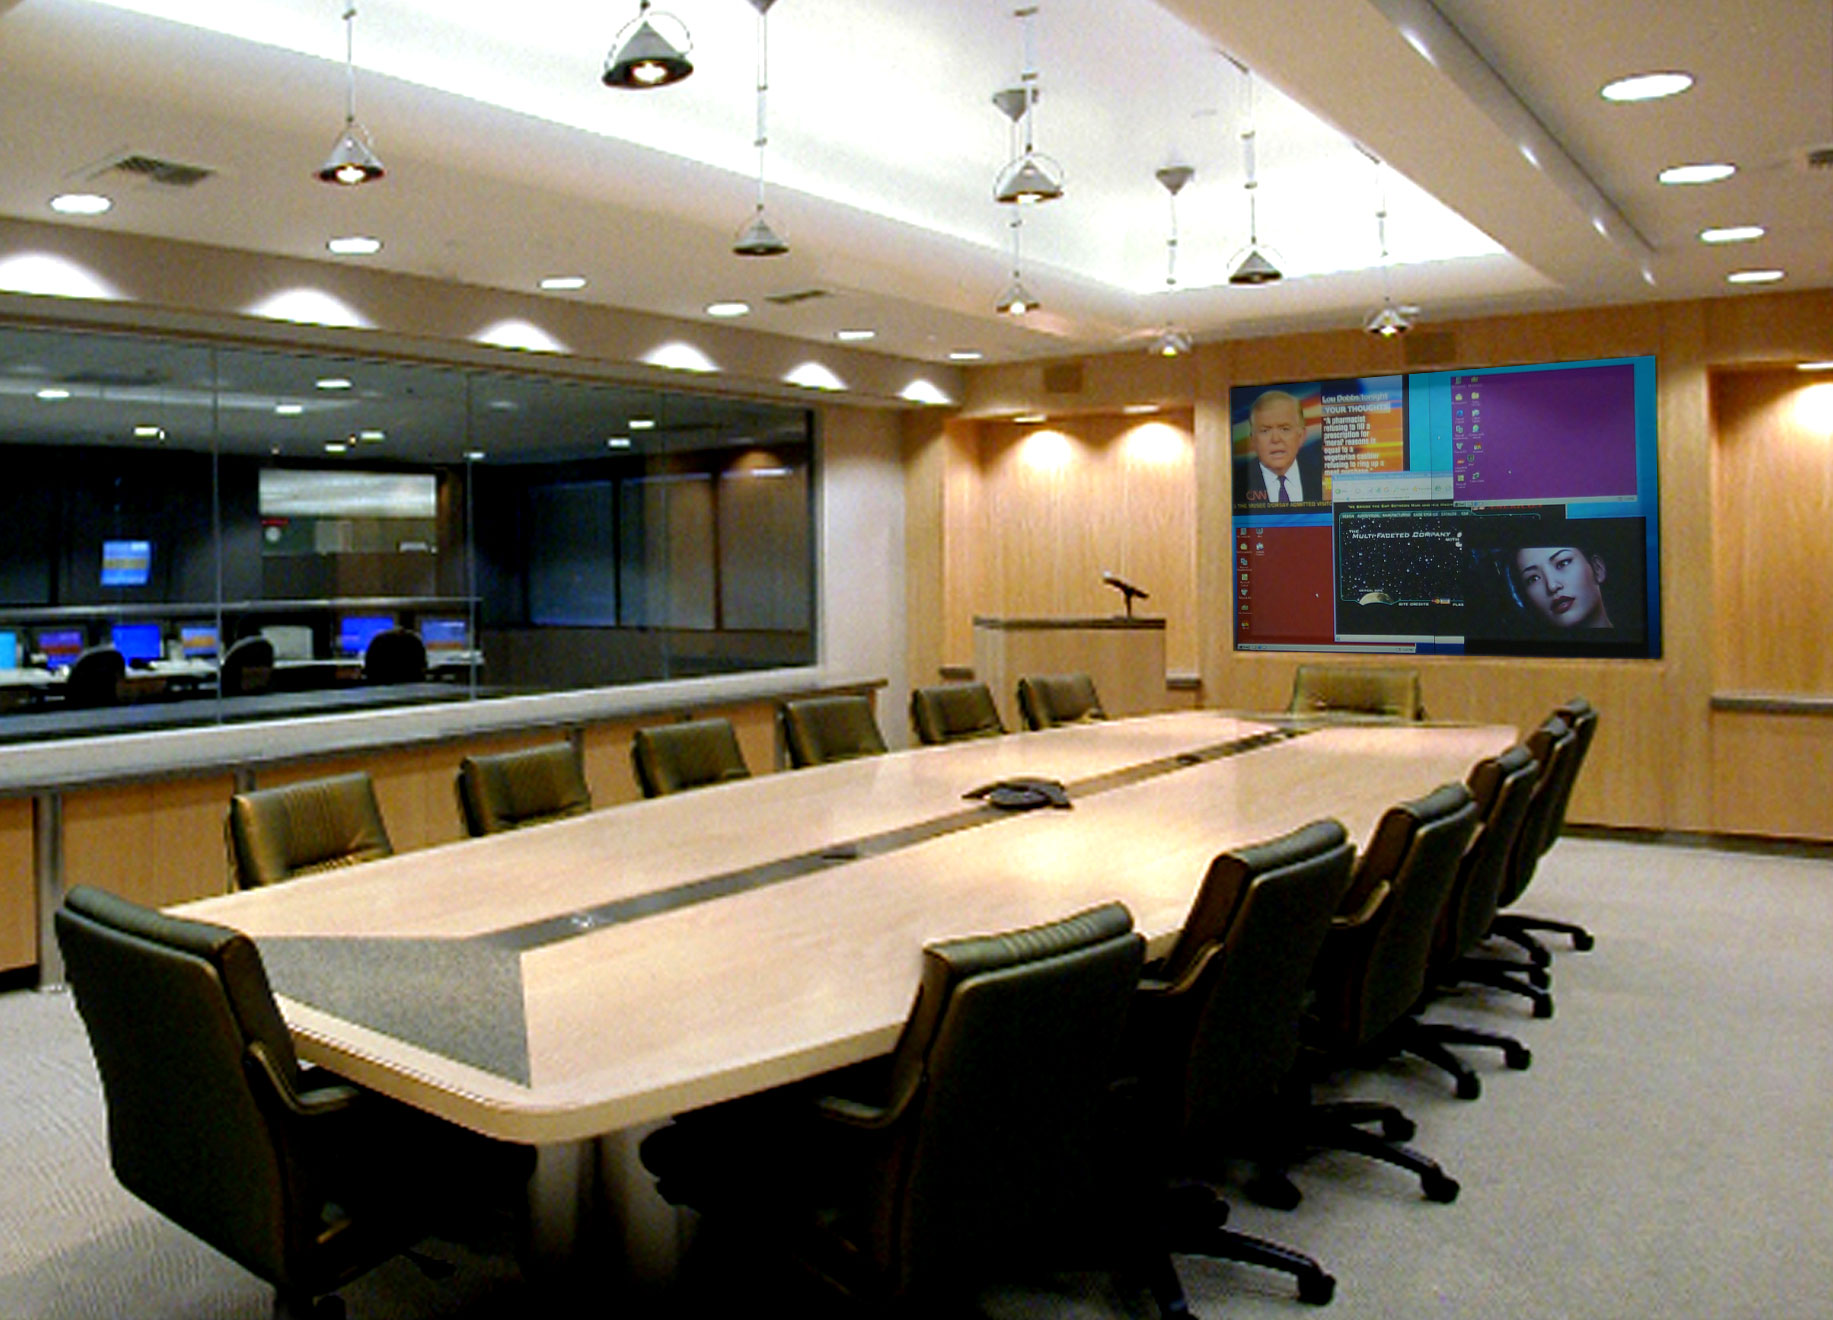 Multi-purpose Conference Room with Visionmaster DLP Video Wall